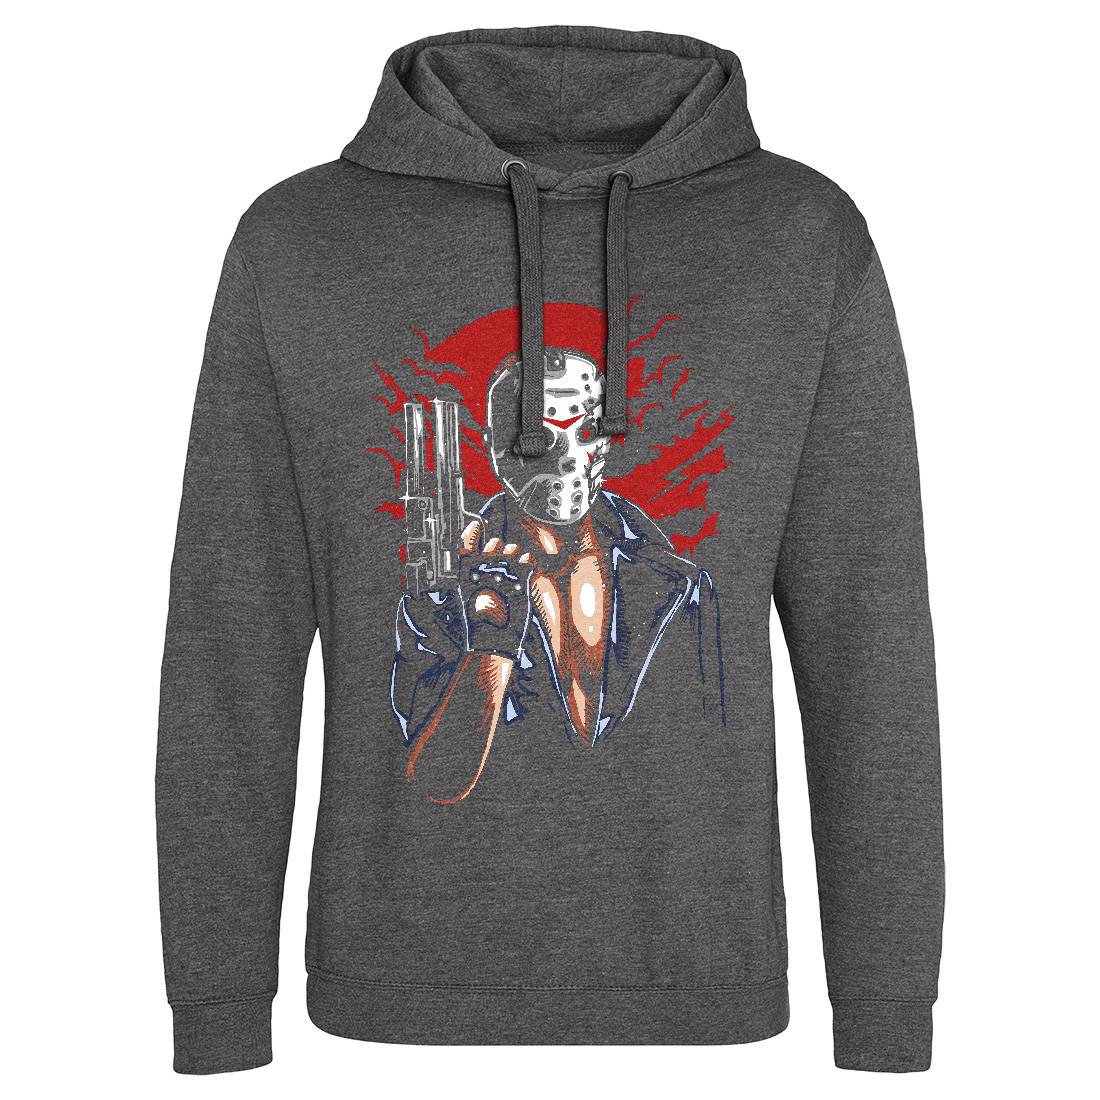 Jason Mens Hoodie Without Pocket Horror A548